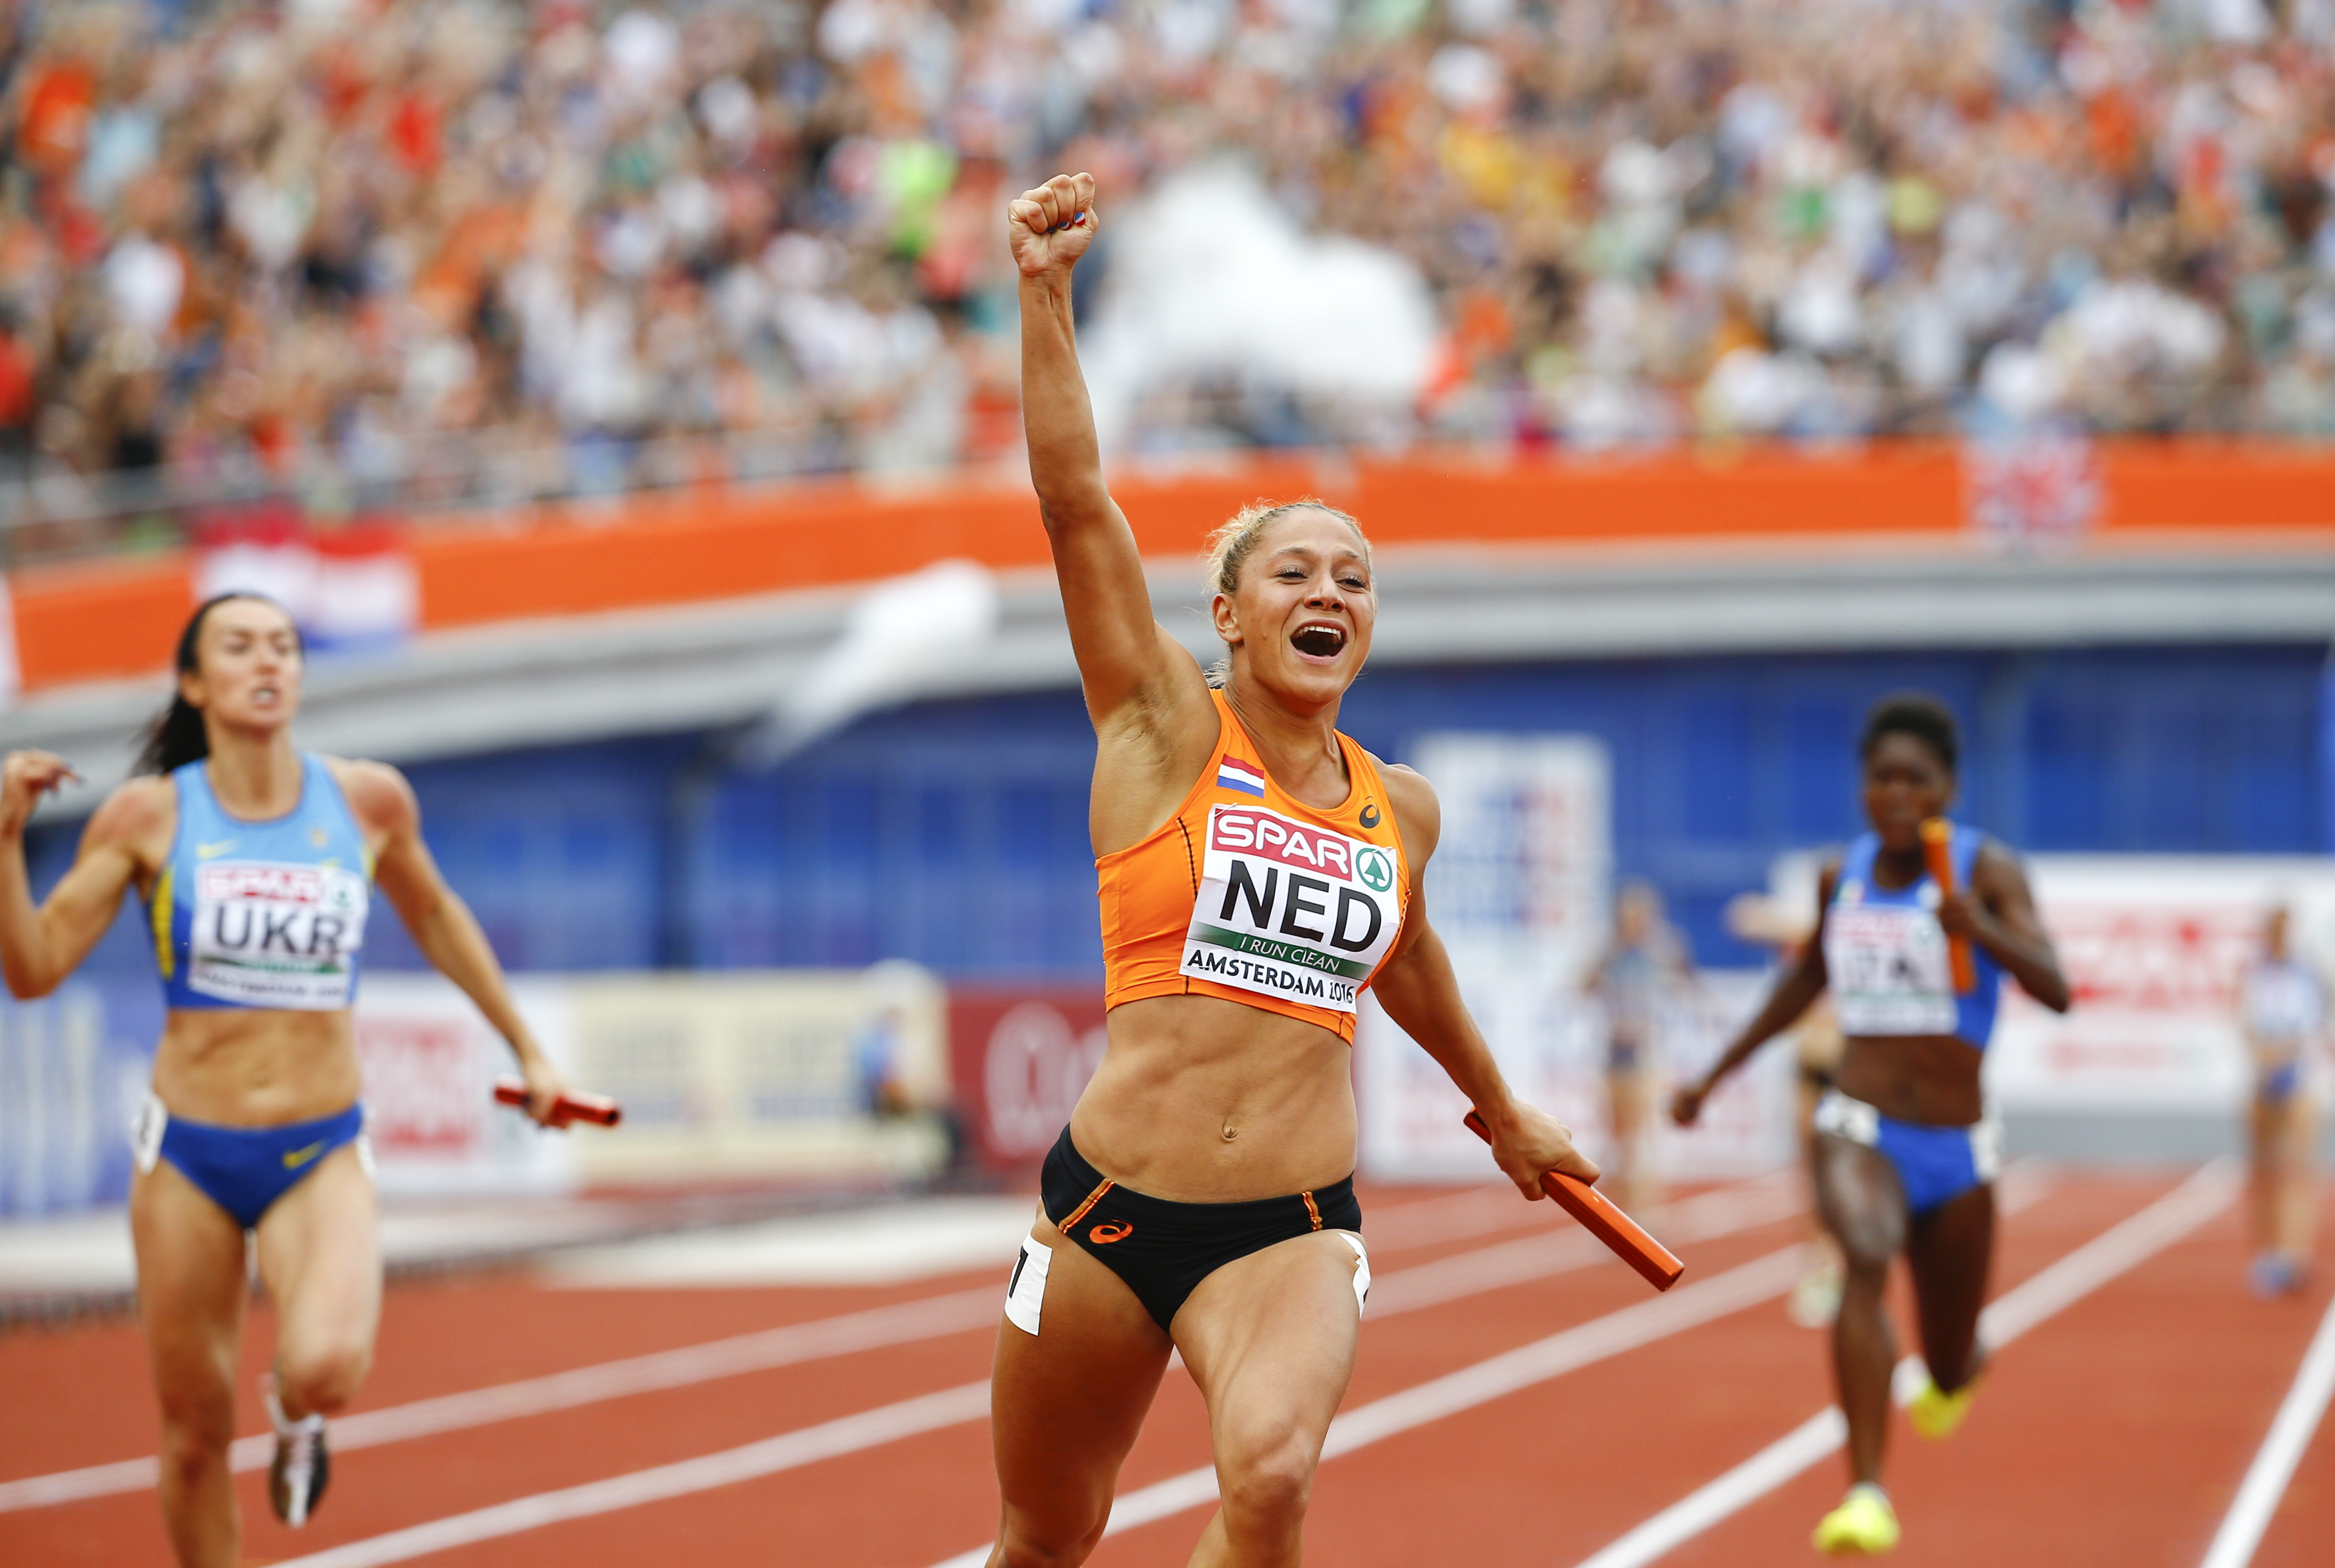 A triumphant Naomi Sedney crosses the finish as the Netherlands takes the 4x100m relay title. Photo: Reuters 